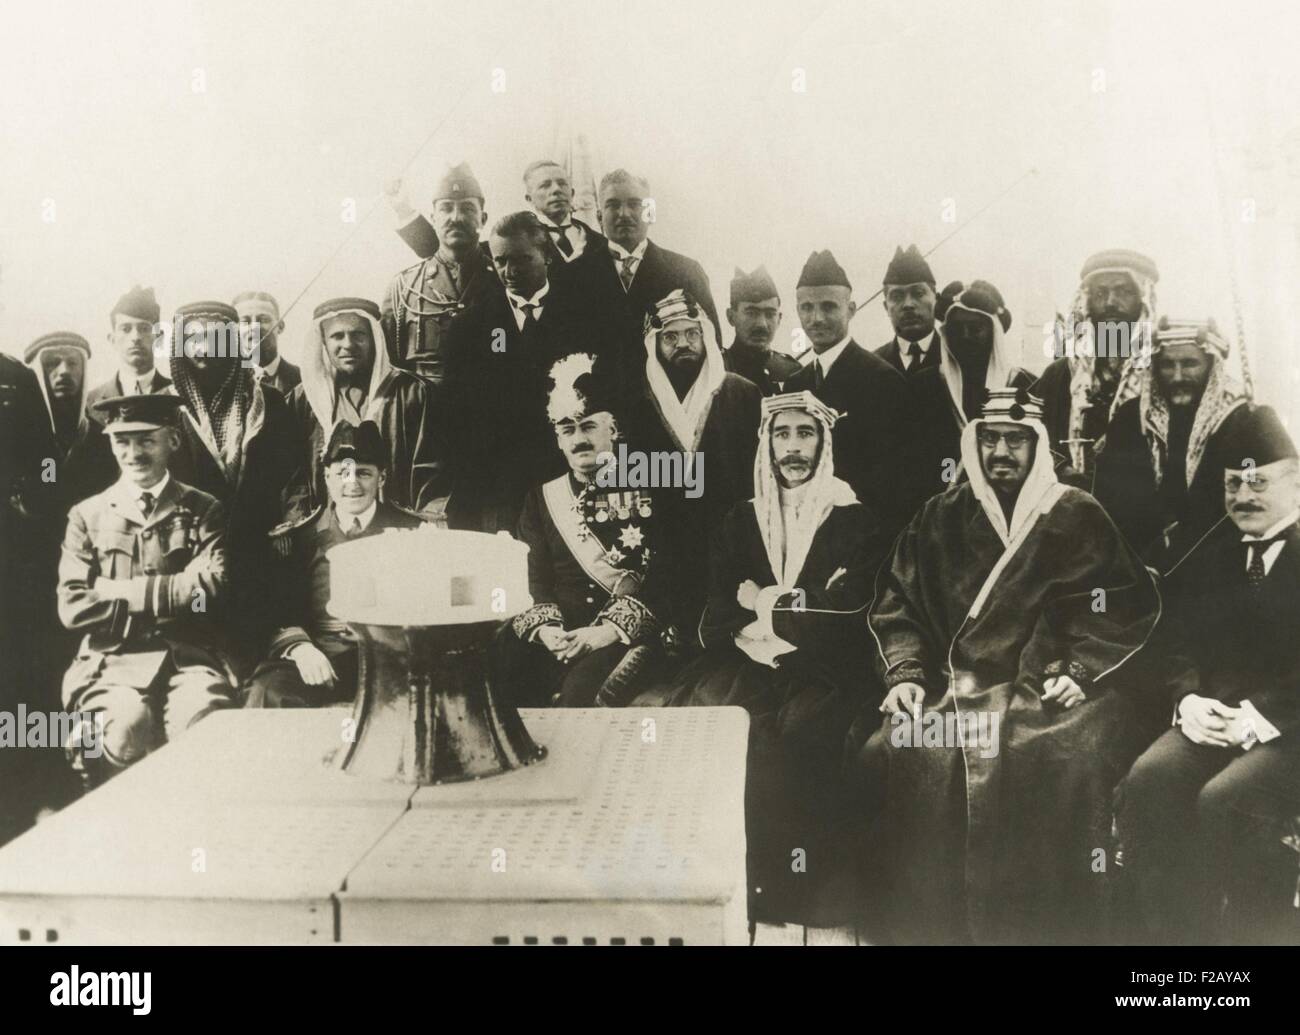 King Faisal of Iraq and King Ibn Saud of Najd signed a peace treaty aboard HMS Lupin. Feb. 22, 1930. The new treaty granted independence to Iraq and Najd (non-coastal Arabian Peninsula). Seated L-R: Sir Brooke Popham, RAF; Capt. Bernard of the Lupin; Sir Francis Henry Humphrys, British High Commissioner; King Faisal of Iraq; King Ibn Saud of Naji; Naji Pasha Suwada. In Sept, 1932 King Saud consolidated his control over most of the Arabian peninsula, newly designated as the Kingdom of Saudi Arabia. (CSU 2015 9 805) Stock Photo